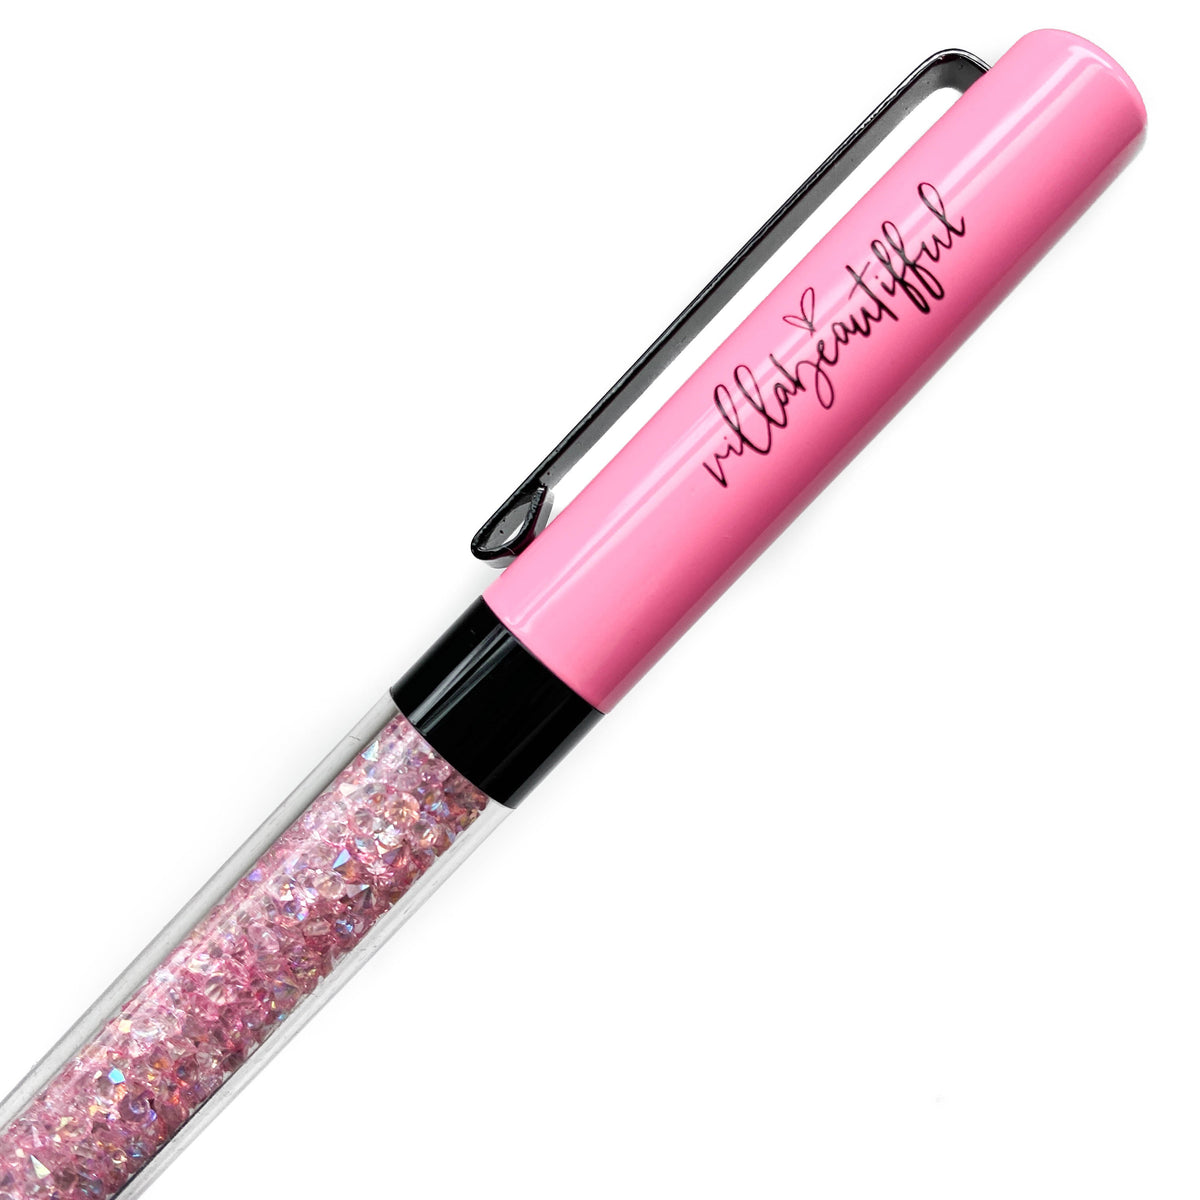 Valley Girl Imperfect Crystal VBPen | limited pen